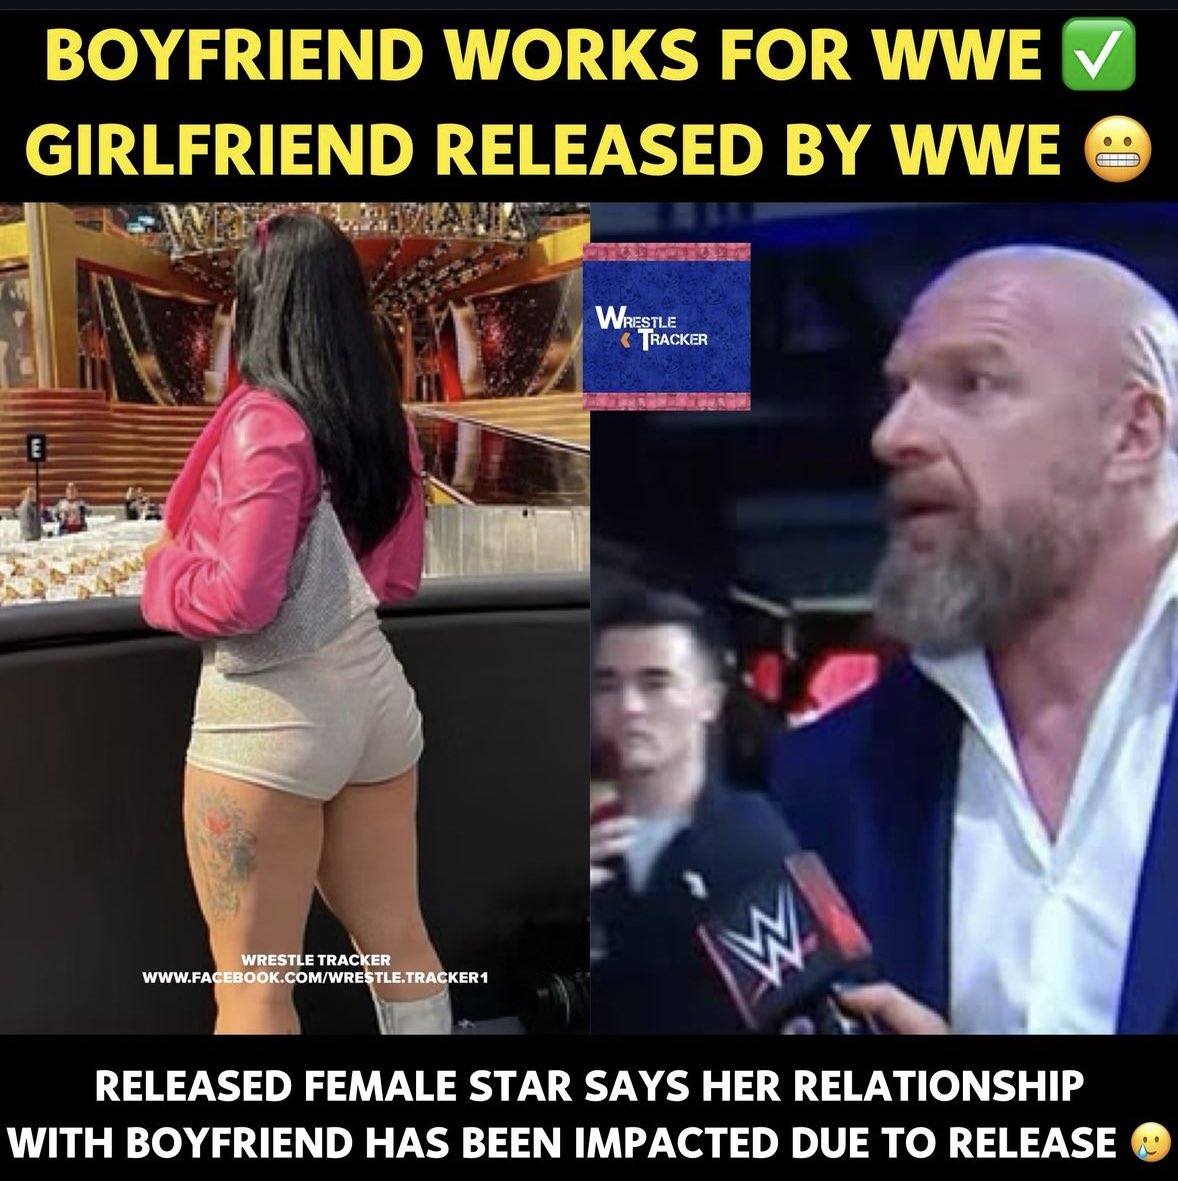 Current WWE Superstar’s girlfriend says WWE releasing her has impacted their relationship Read 👉 bit.ly/4acp2TF #WWE #WWERAW